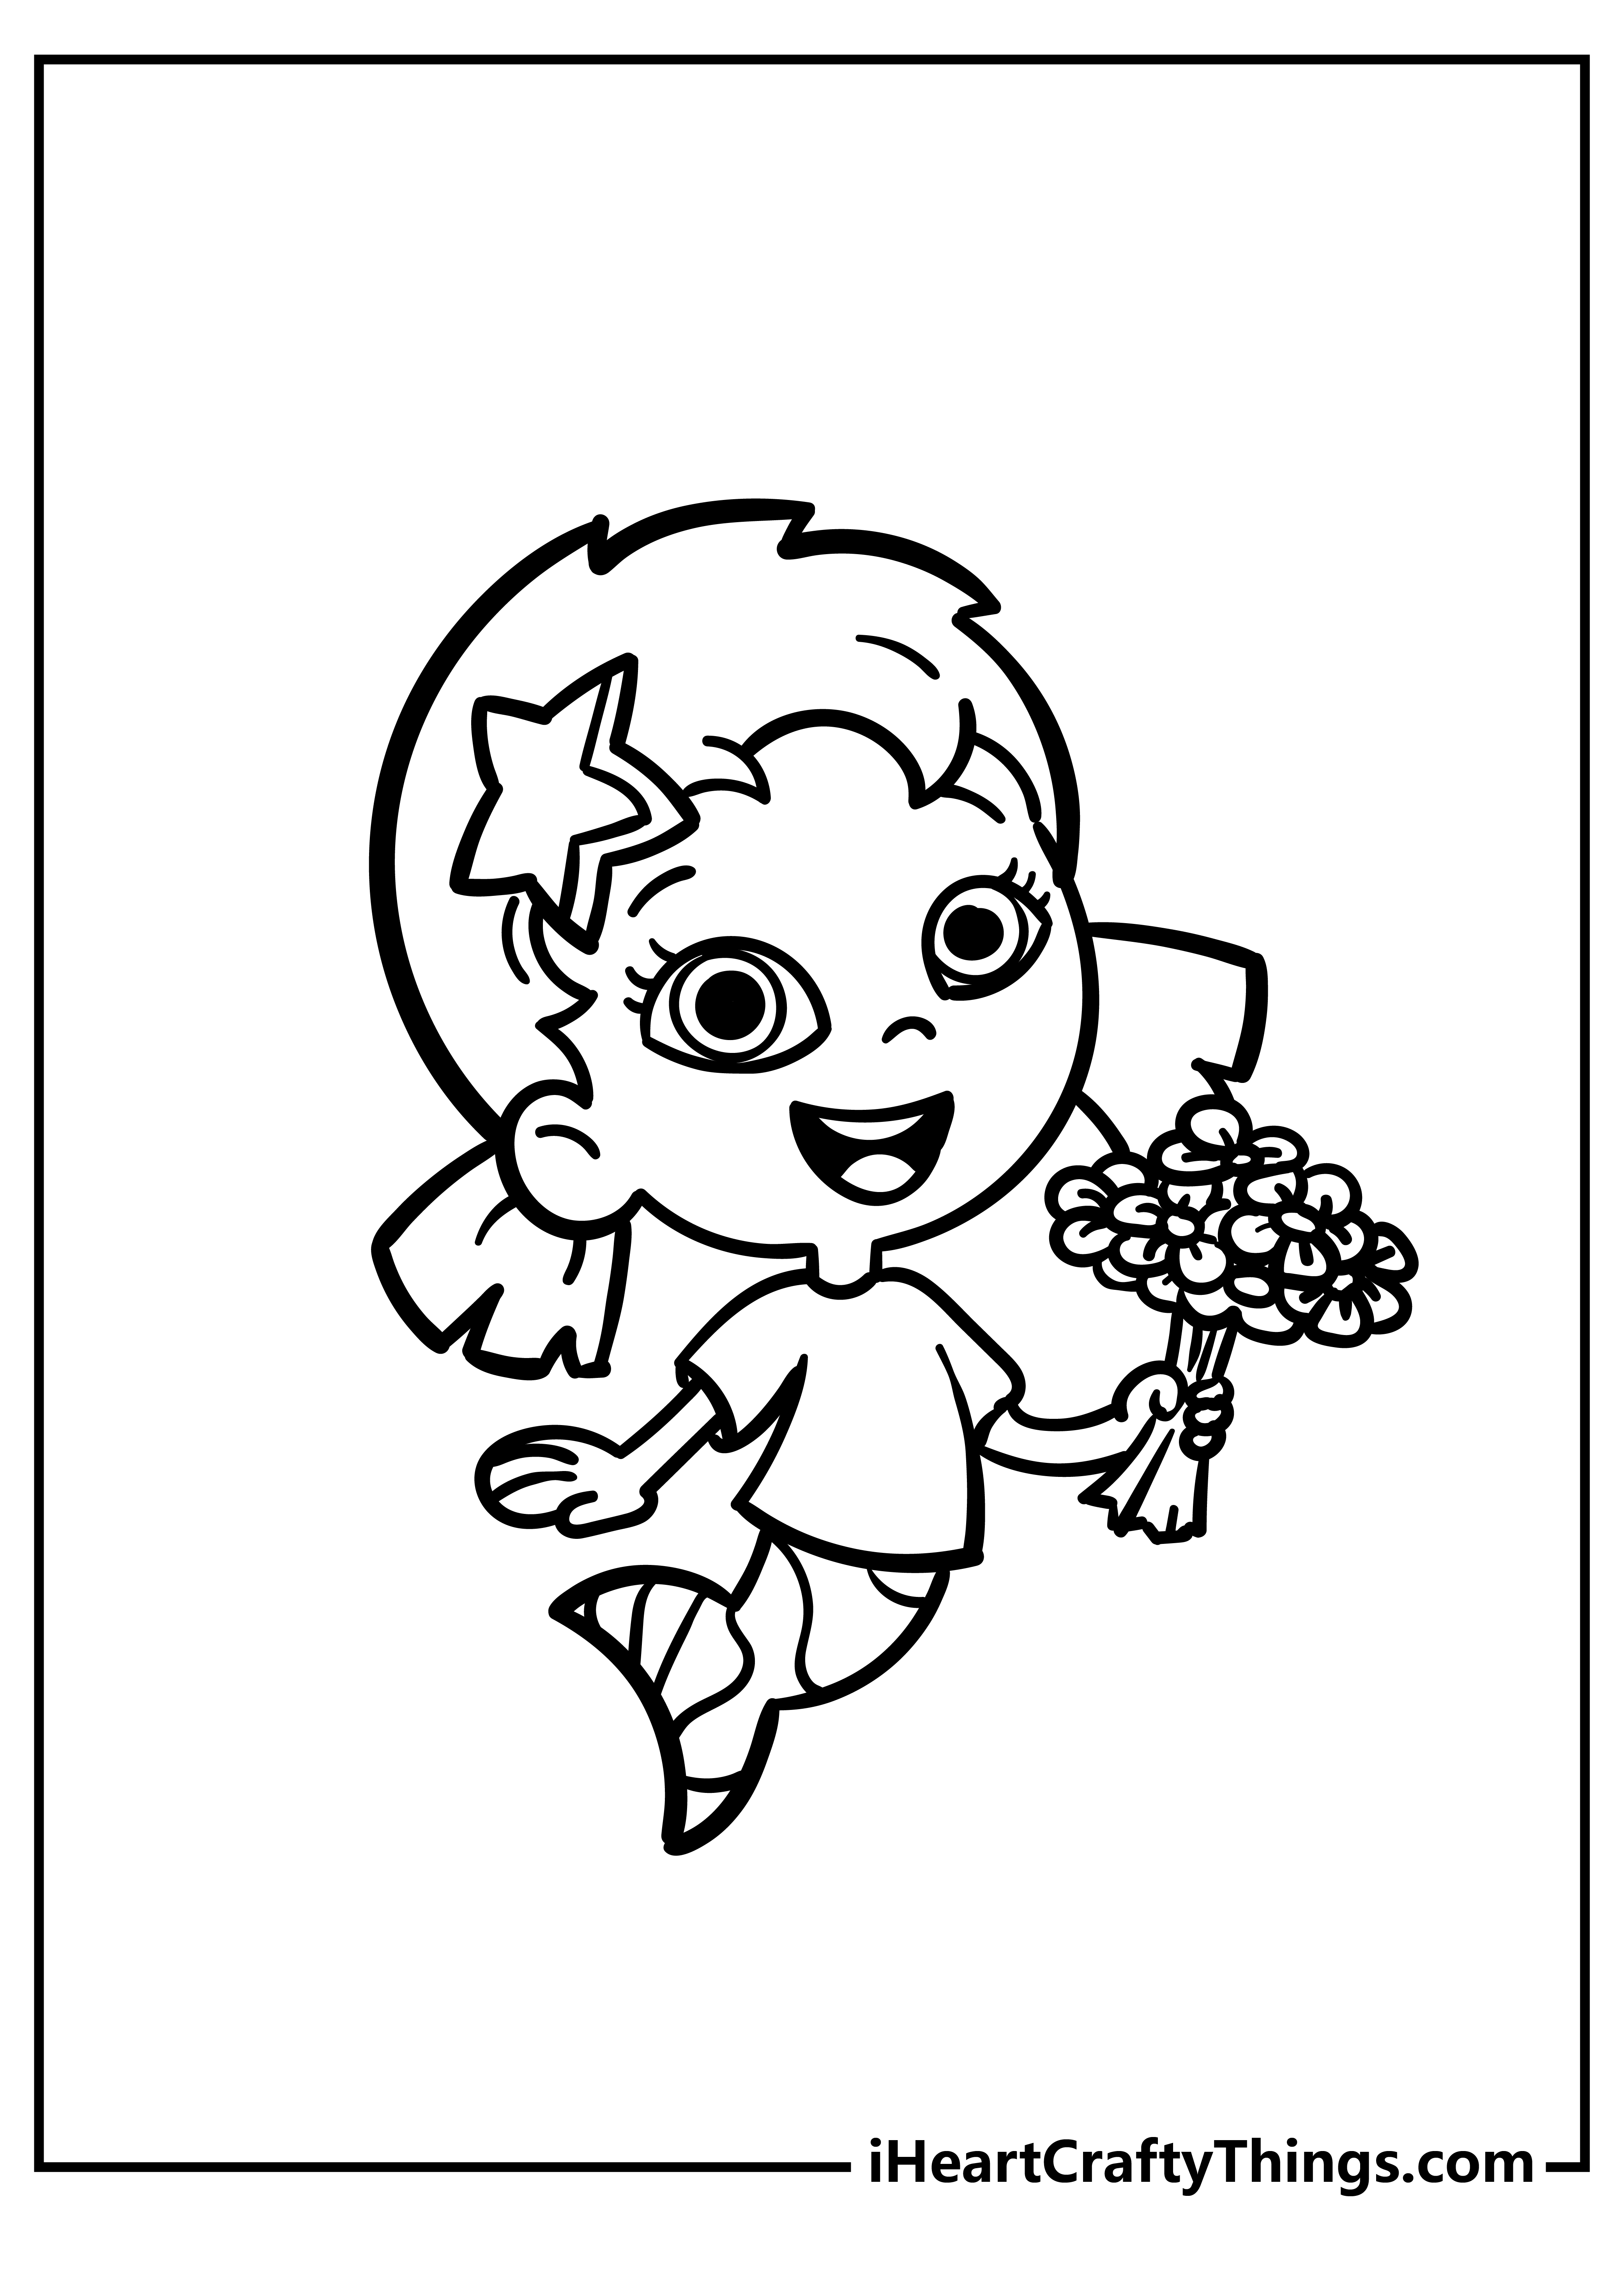 Bubble Guppies Coloring Original Sheet for children free download